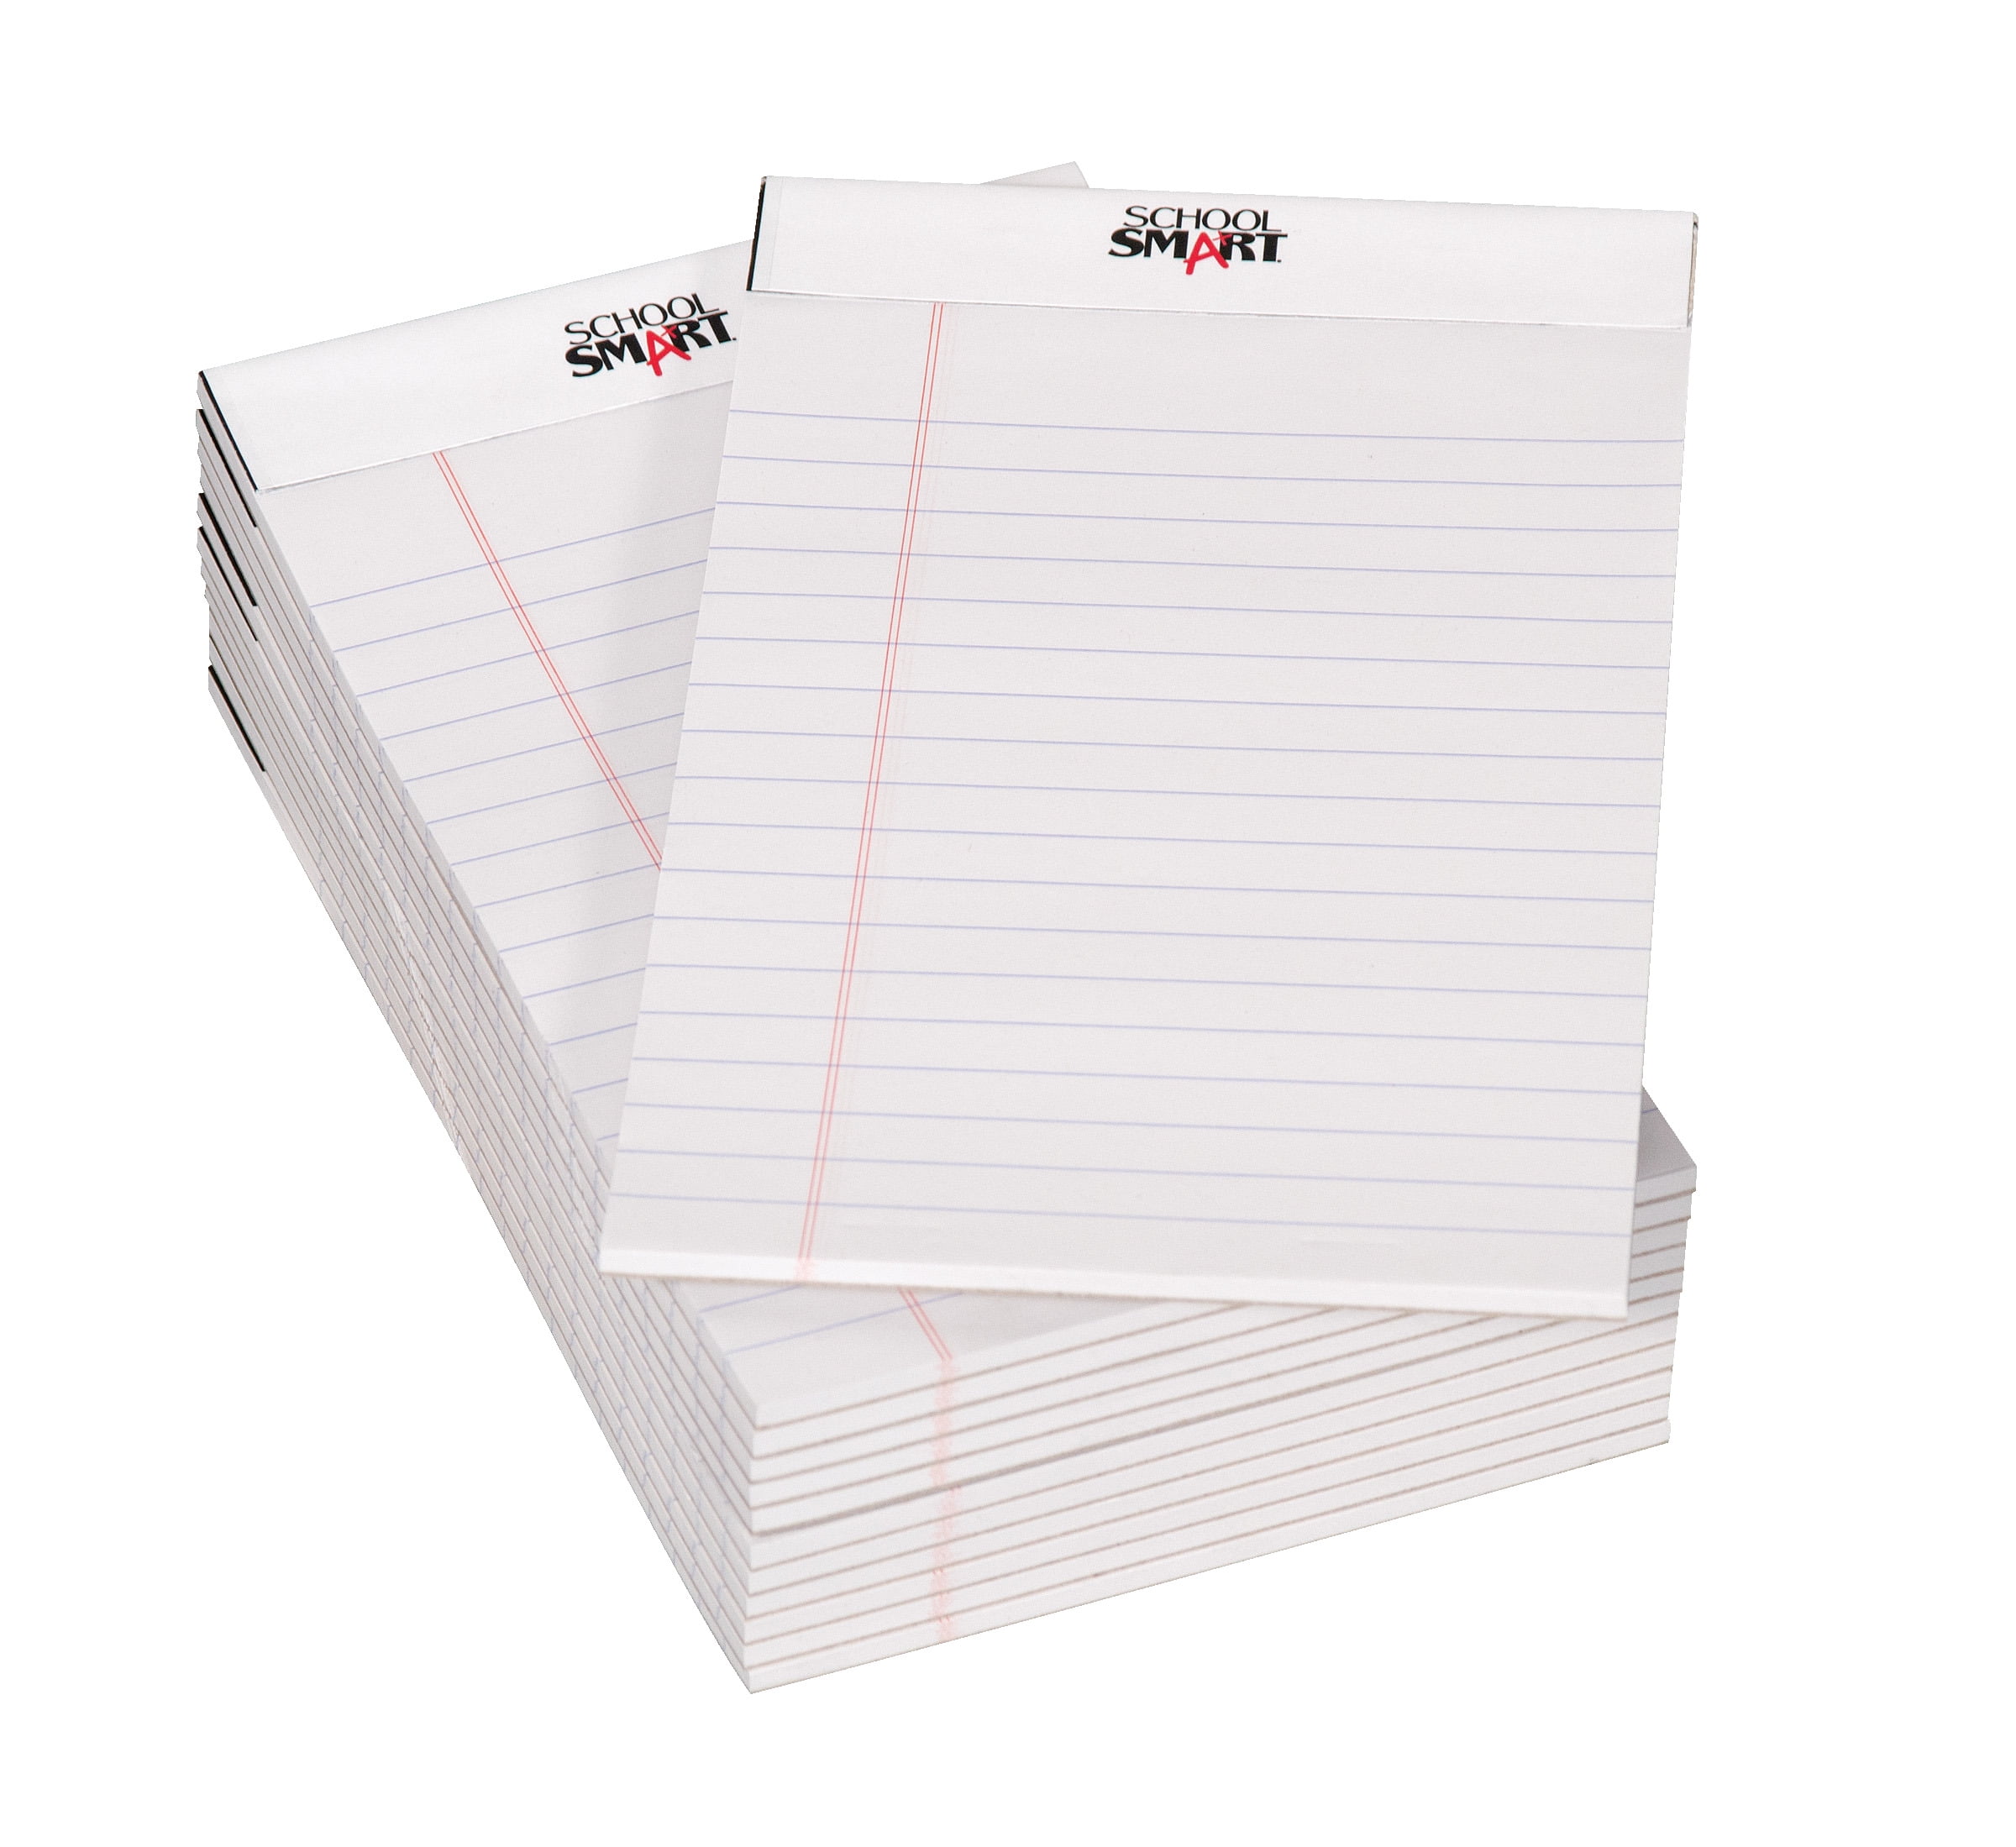 School Smart Junior Legal Pad Pack of 12 50 Sheets Each Canary 5 x 8 Inches 